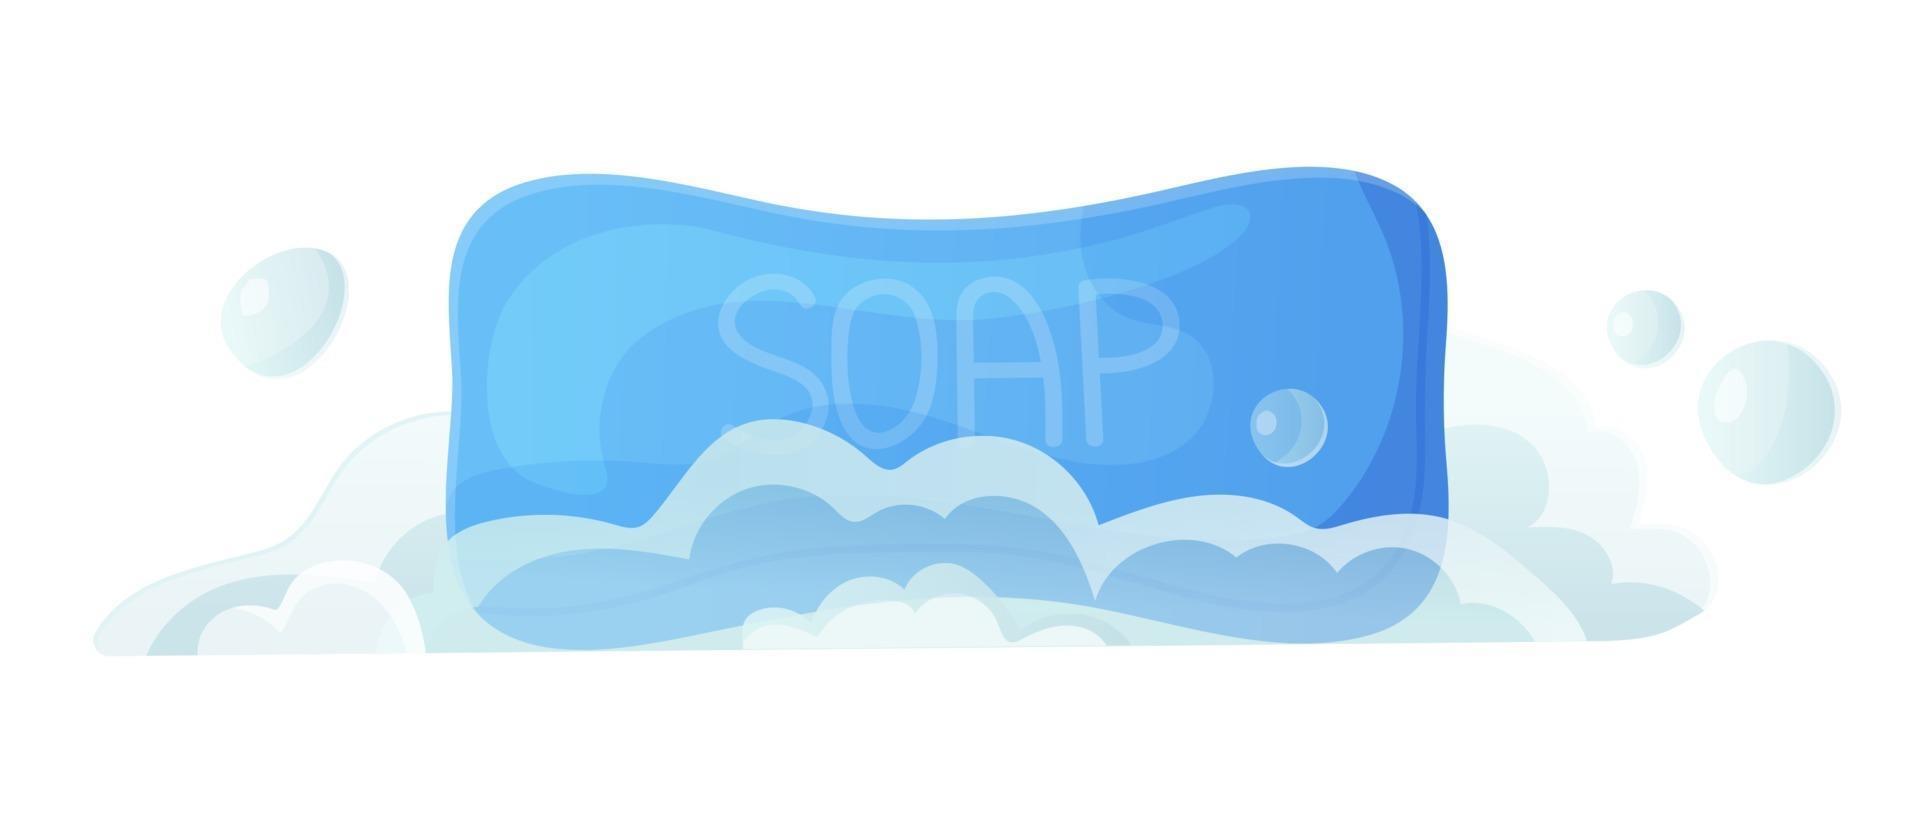 Blue solid soap with bubble and foam  Fresh  clean  hygiene  skin care cosmetic  wash hands  bath accessories concept  Stock vector illustration in flat cartoon style isolated on white